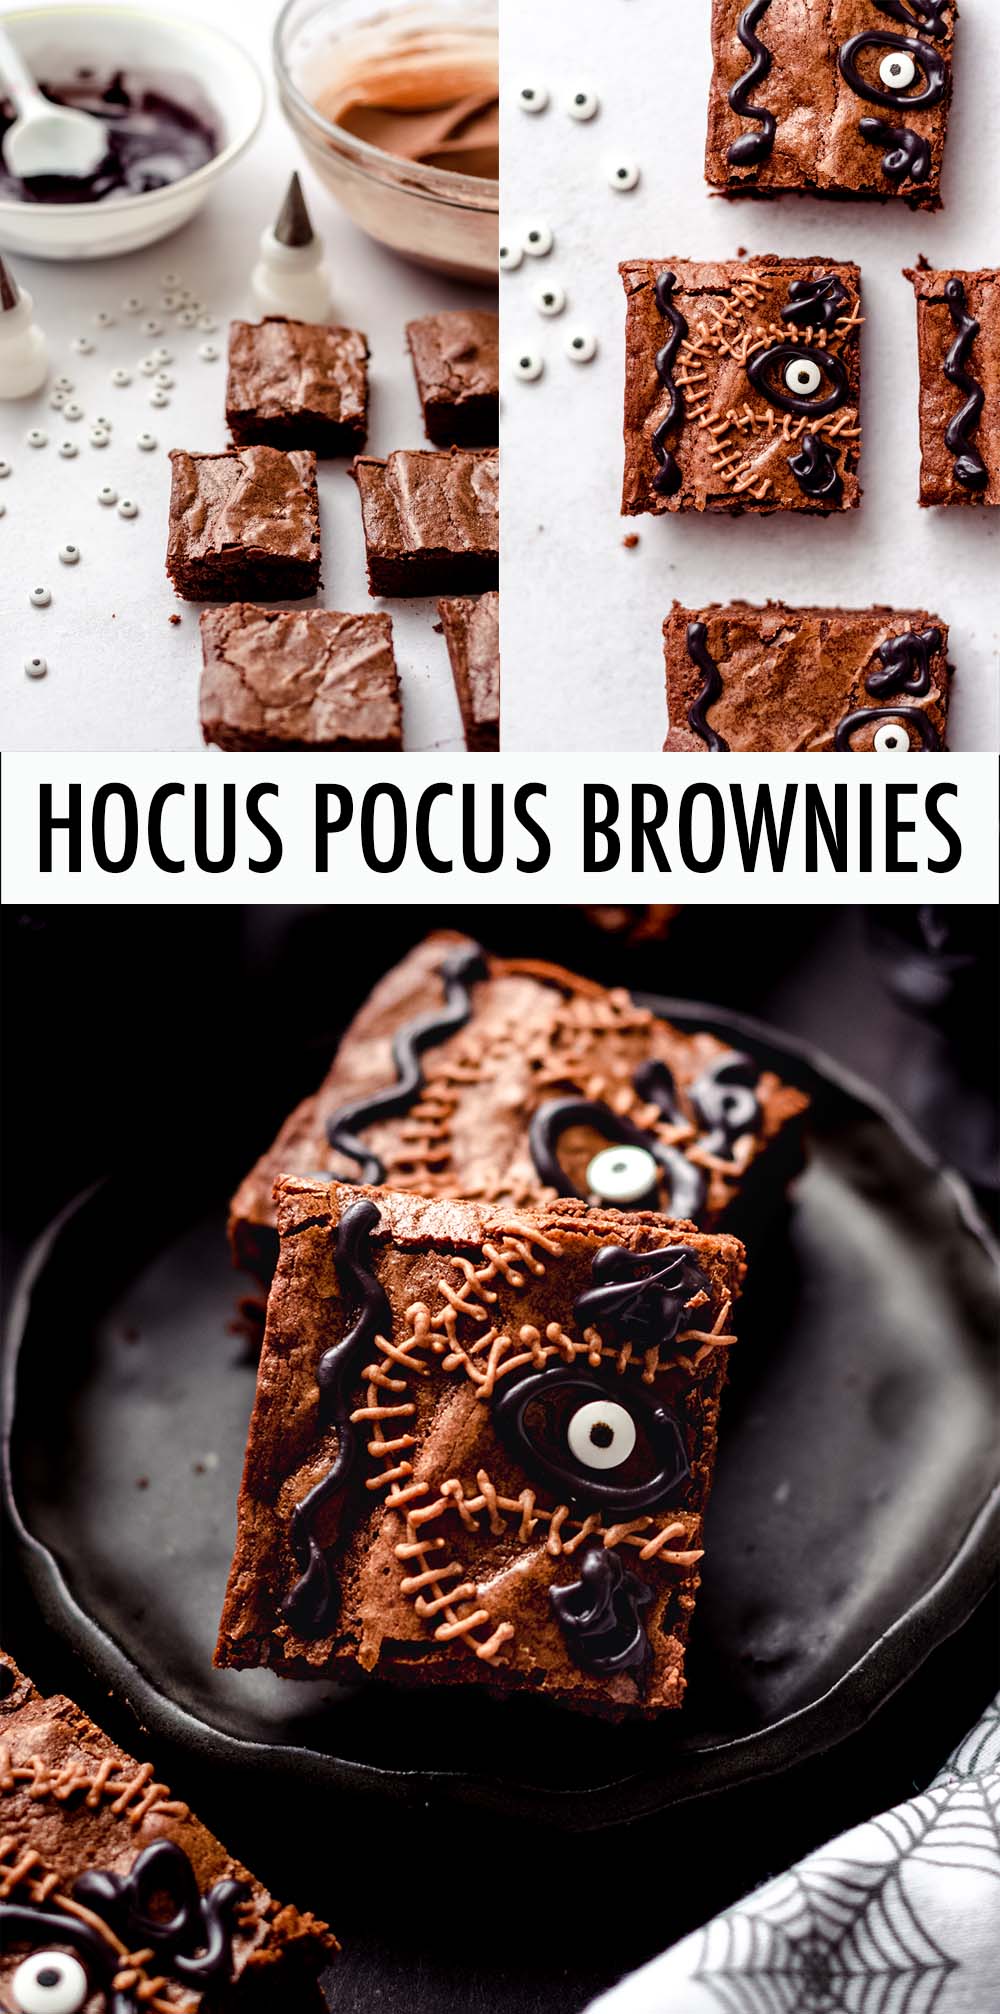 Turn traditional brownies into an iconic Hocus Pocus themed treat! Use my recipe for my favorite homemade fudgy brownies, your favorite go-to brownie recipe, or even a box mix. Just don't forget the eyeball! via @frshaprilflours